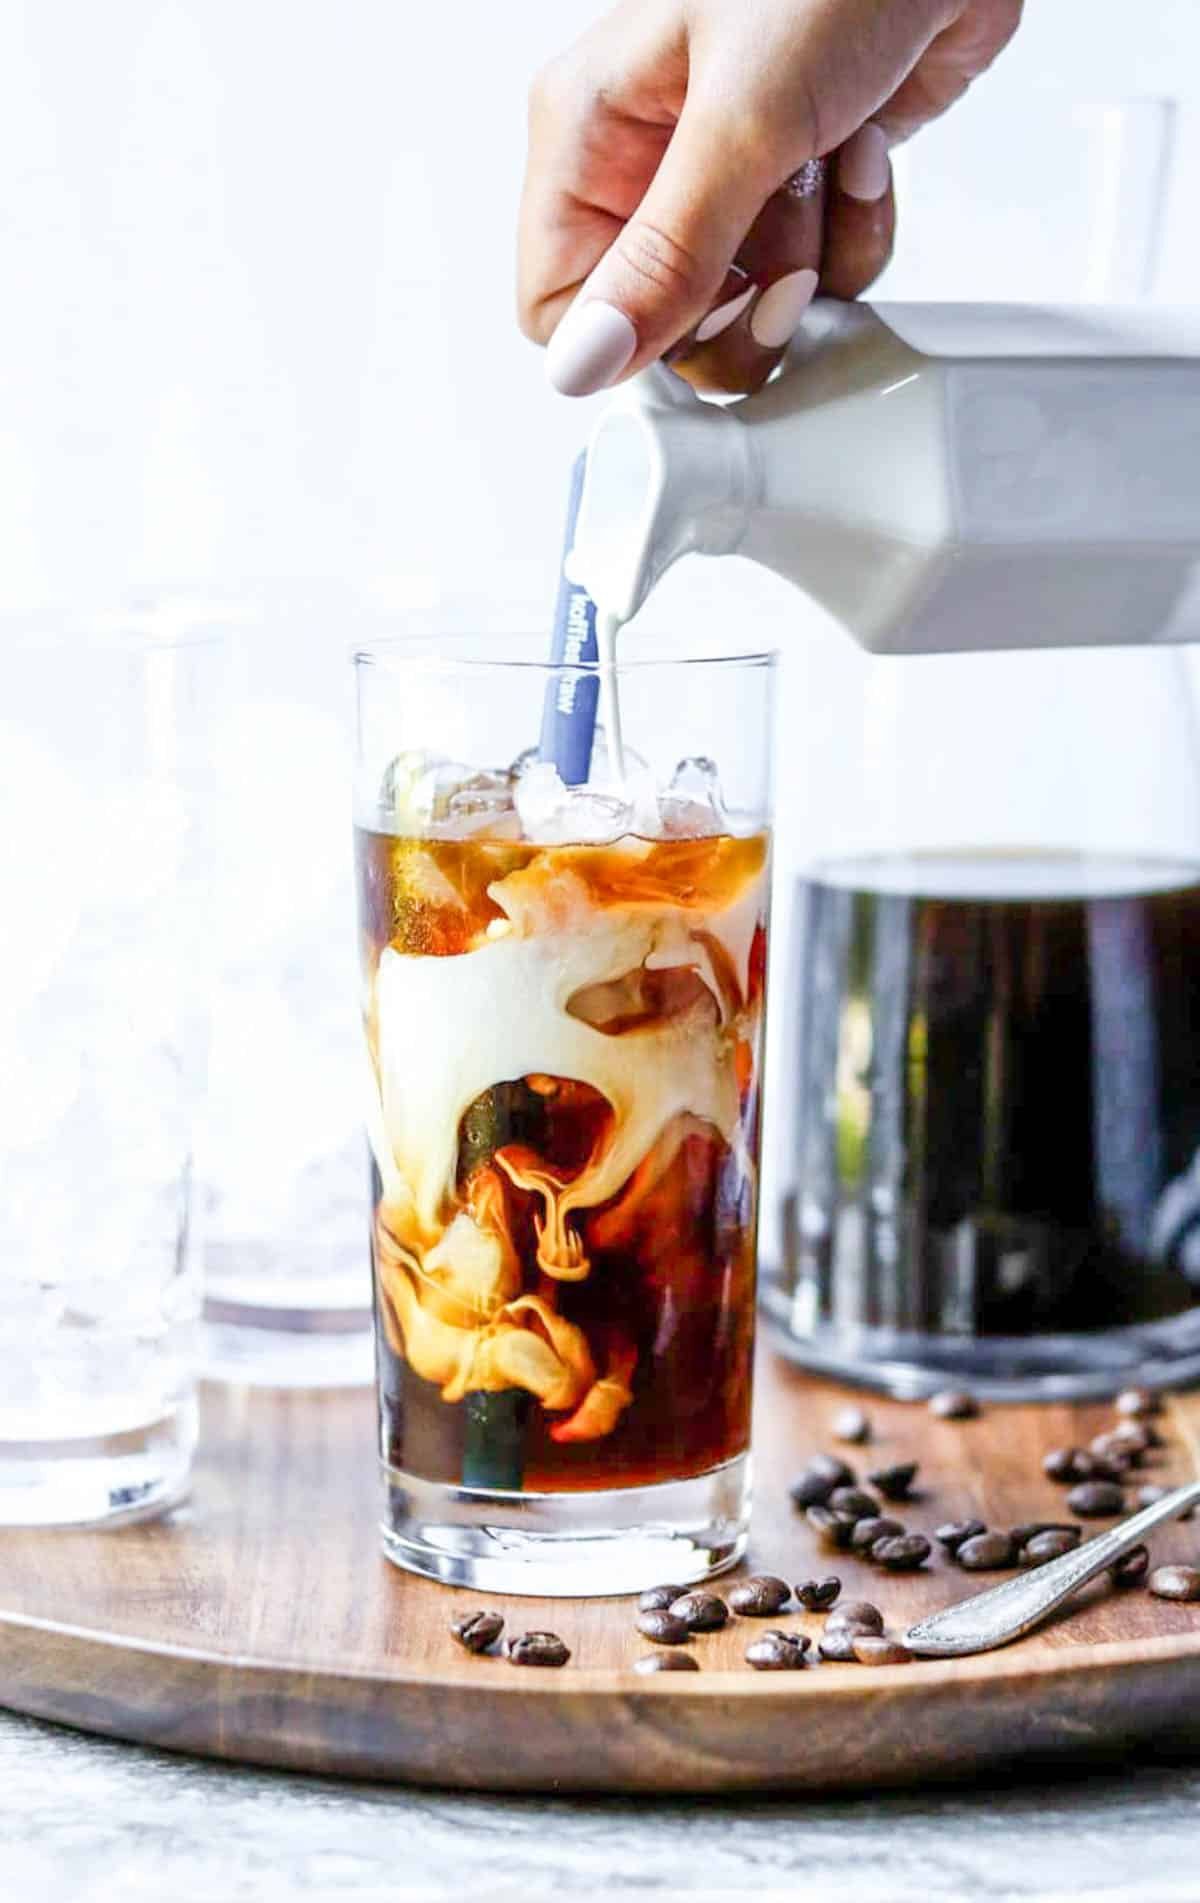 Pouring milk into a glass of cold brew coffee making an iced latte